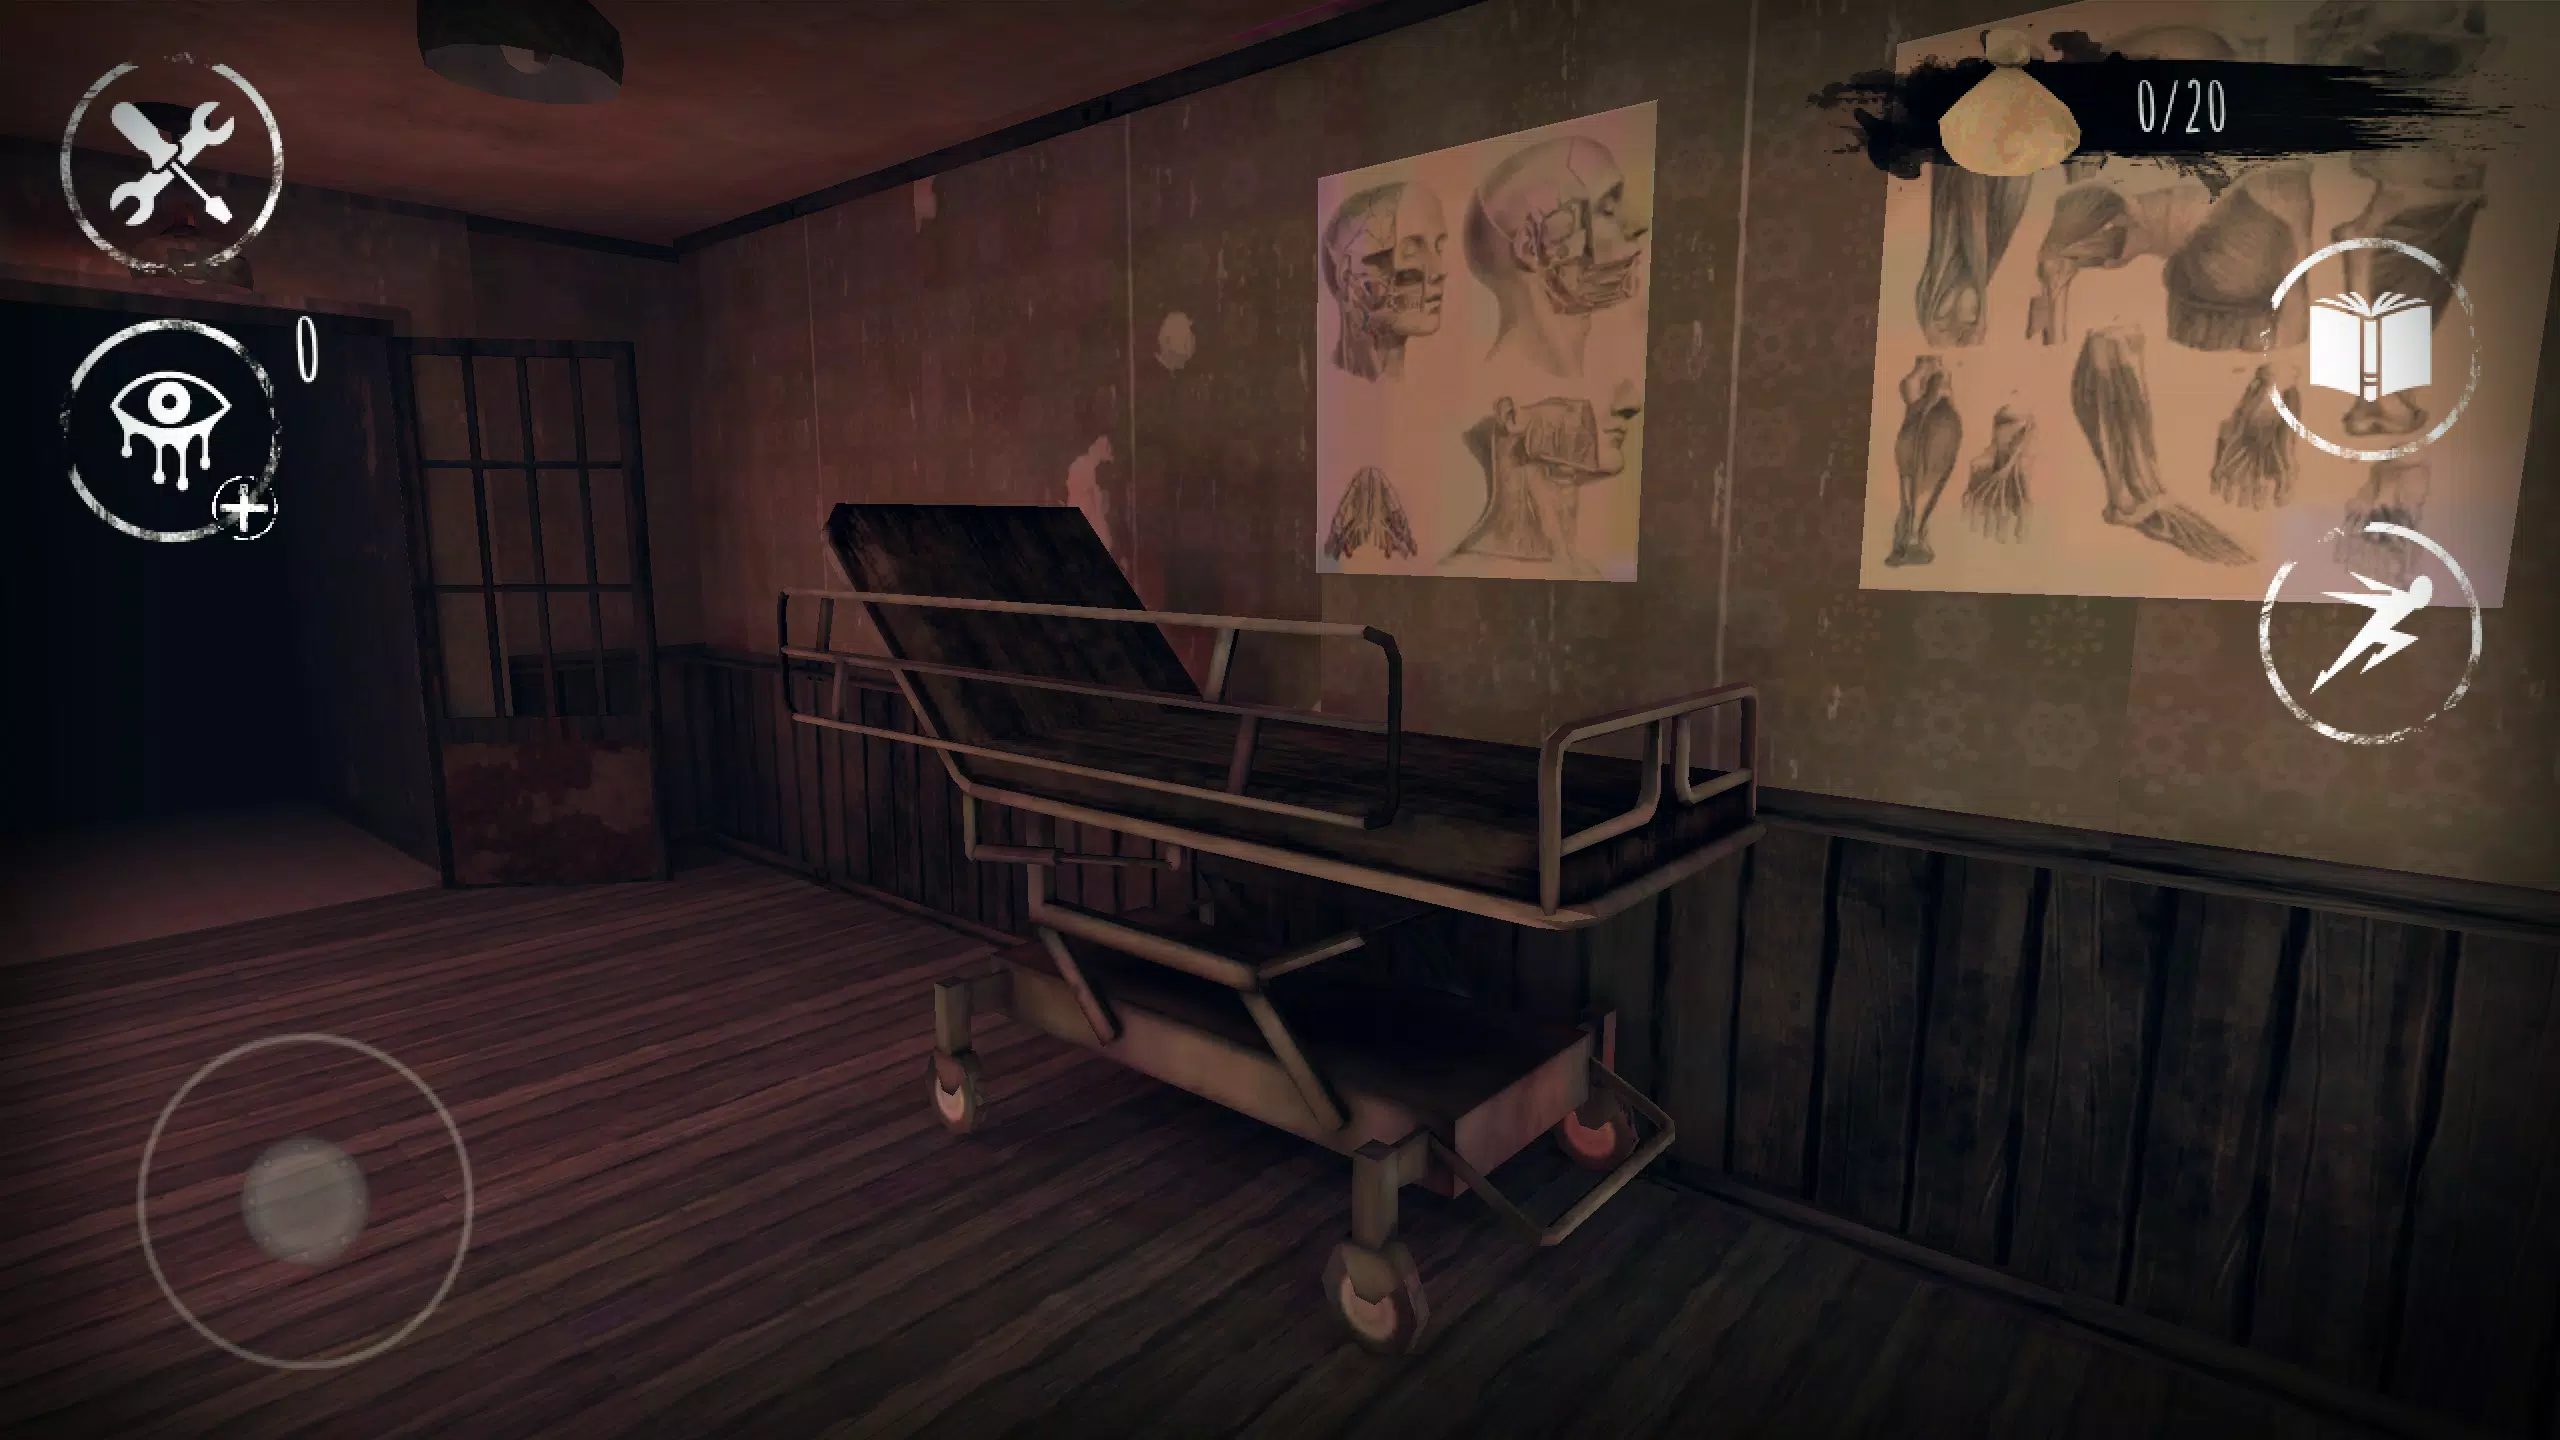 Eyes - The Horror Game 5.9.44 APK Download - Free APK Download for Android™  